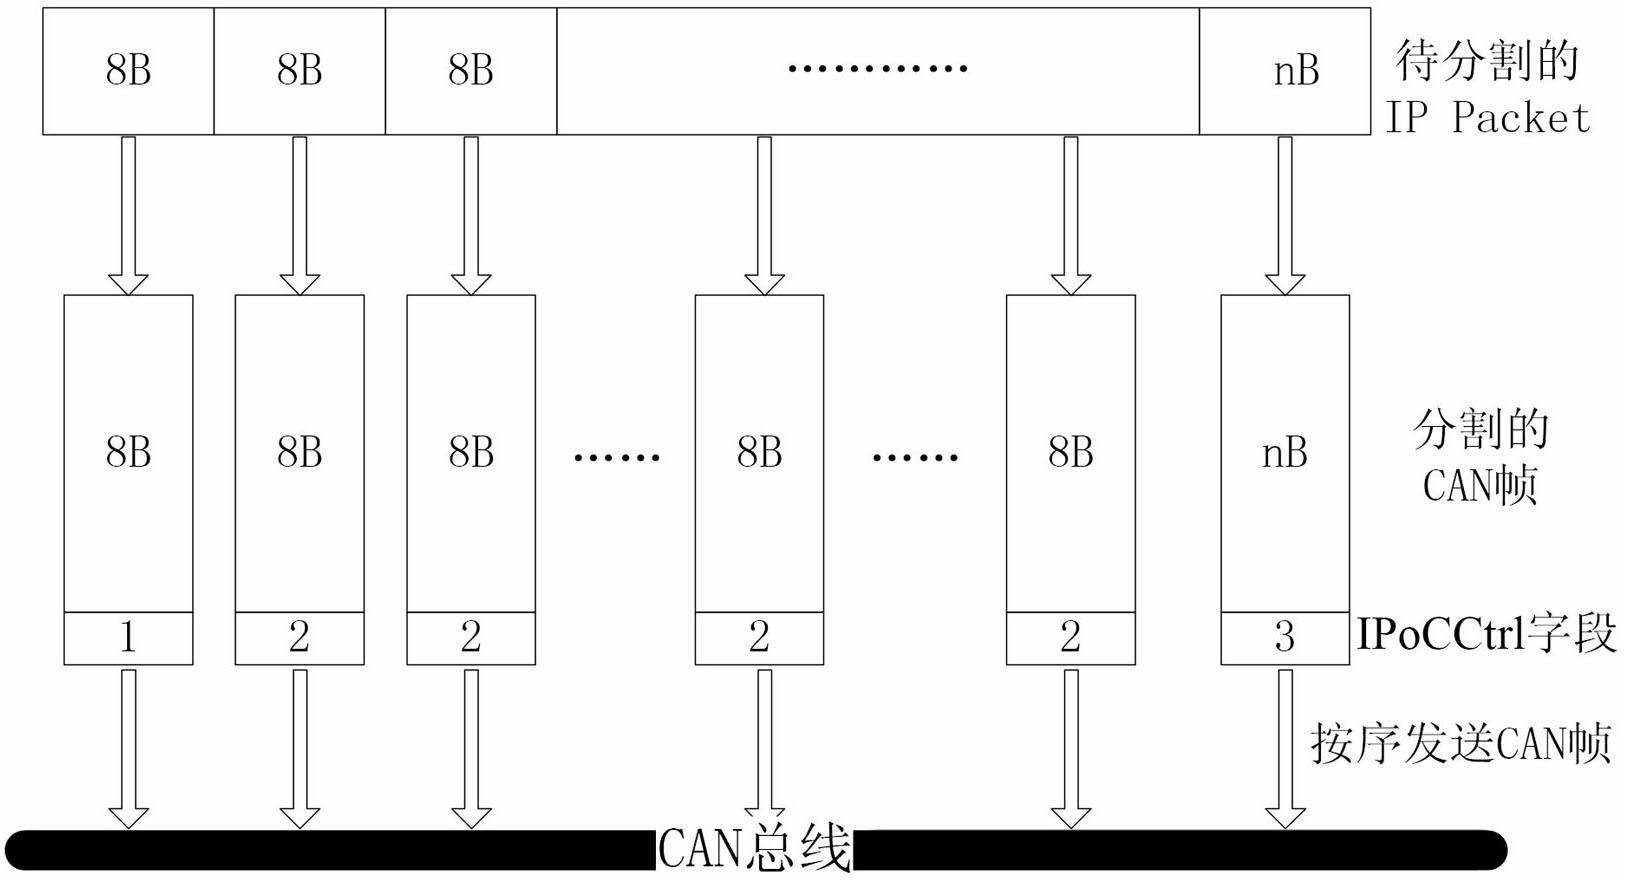 Method for converting data format between IP (Internet Protocol) data packages on CAN (Control Area Network) bus and CAN messages